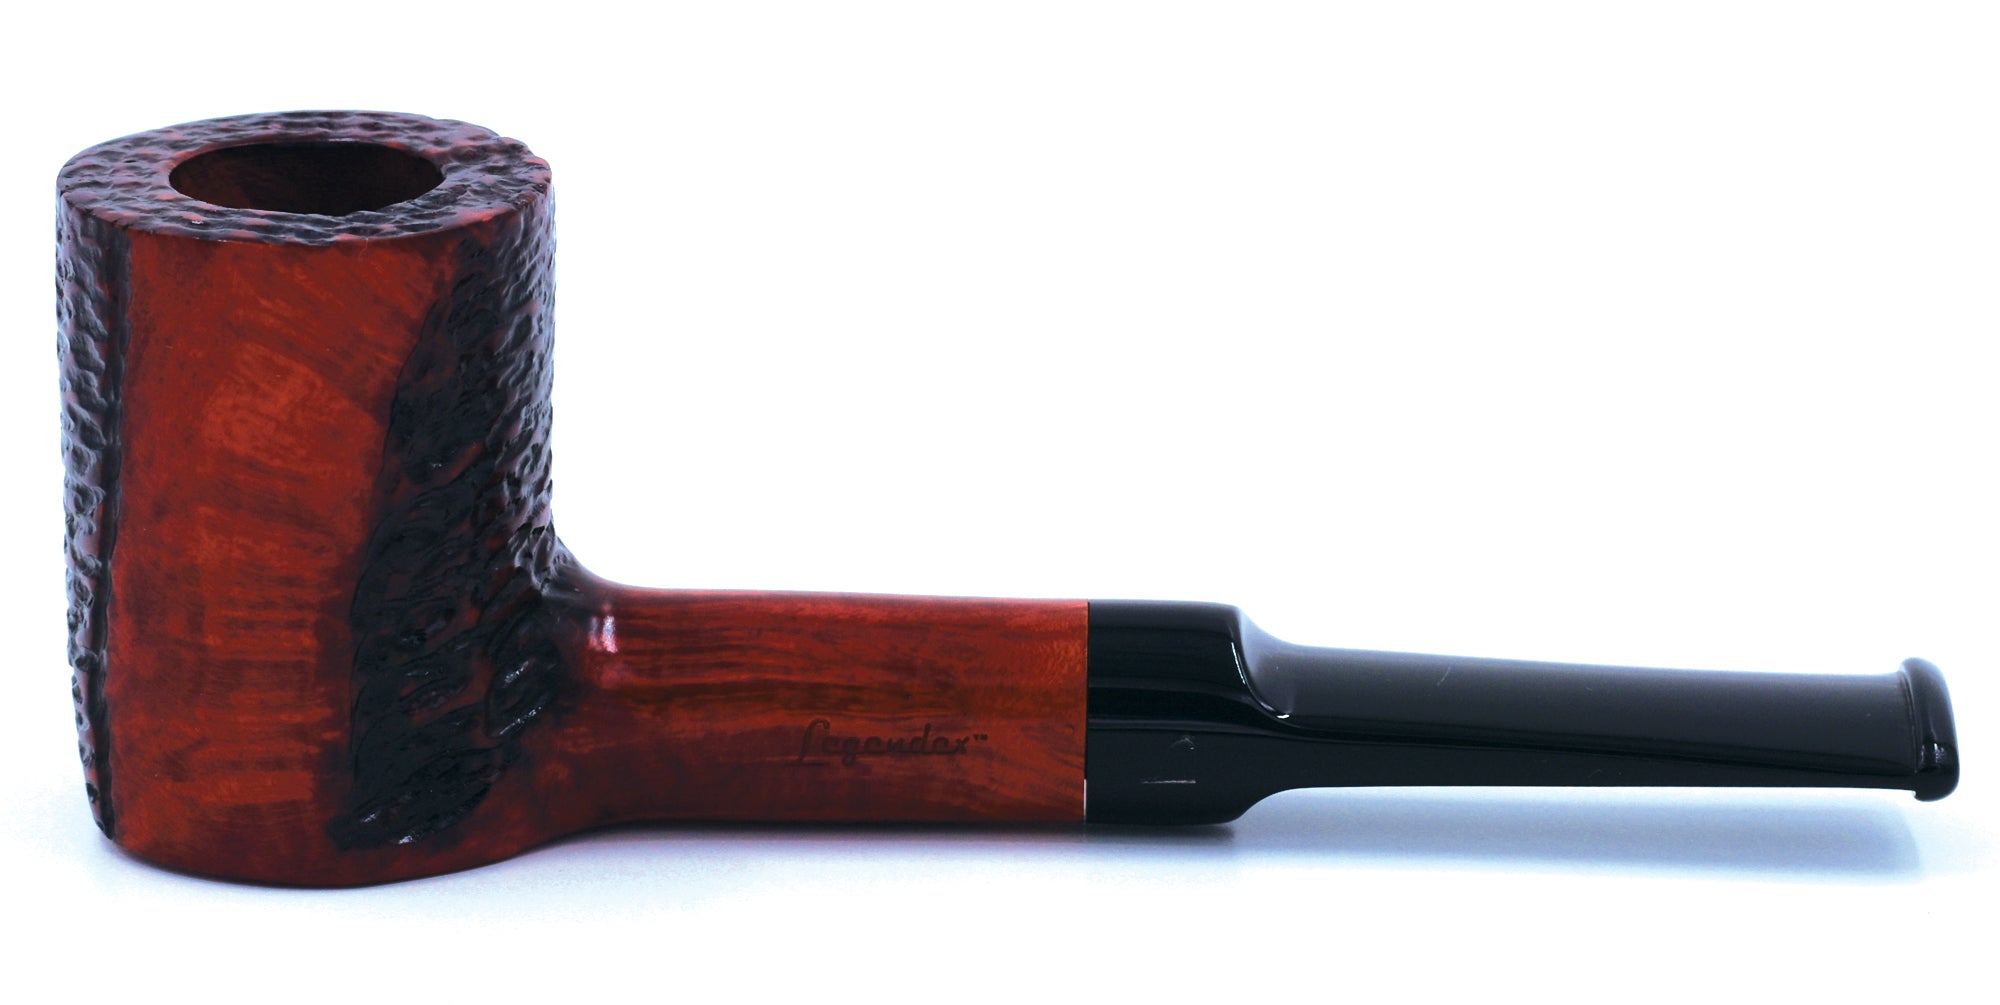 LEGENDEX® PAGANINI* 9 MM Filtered Briar Smoking Pipe Made In Italy 01-08-312